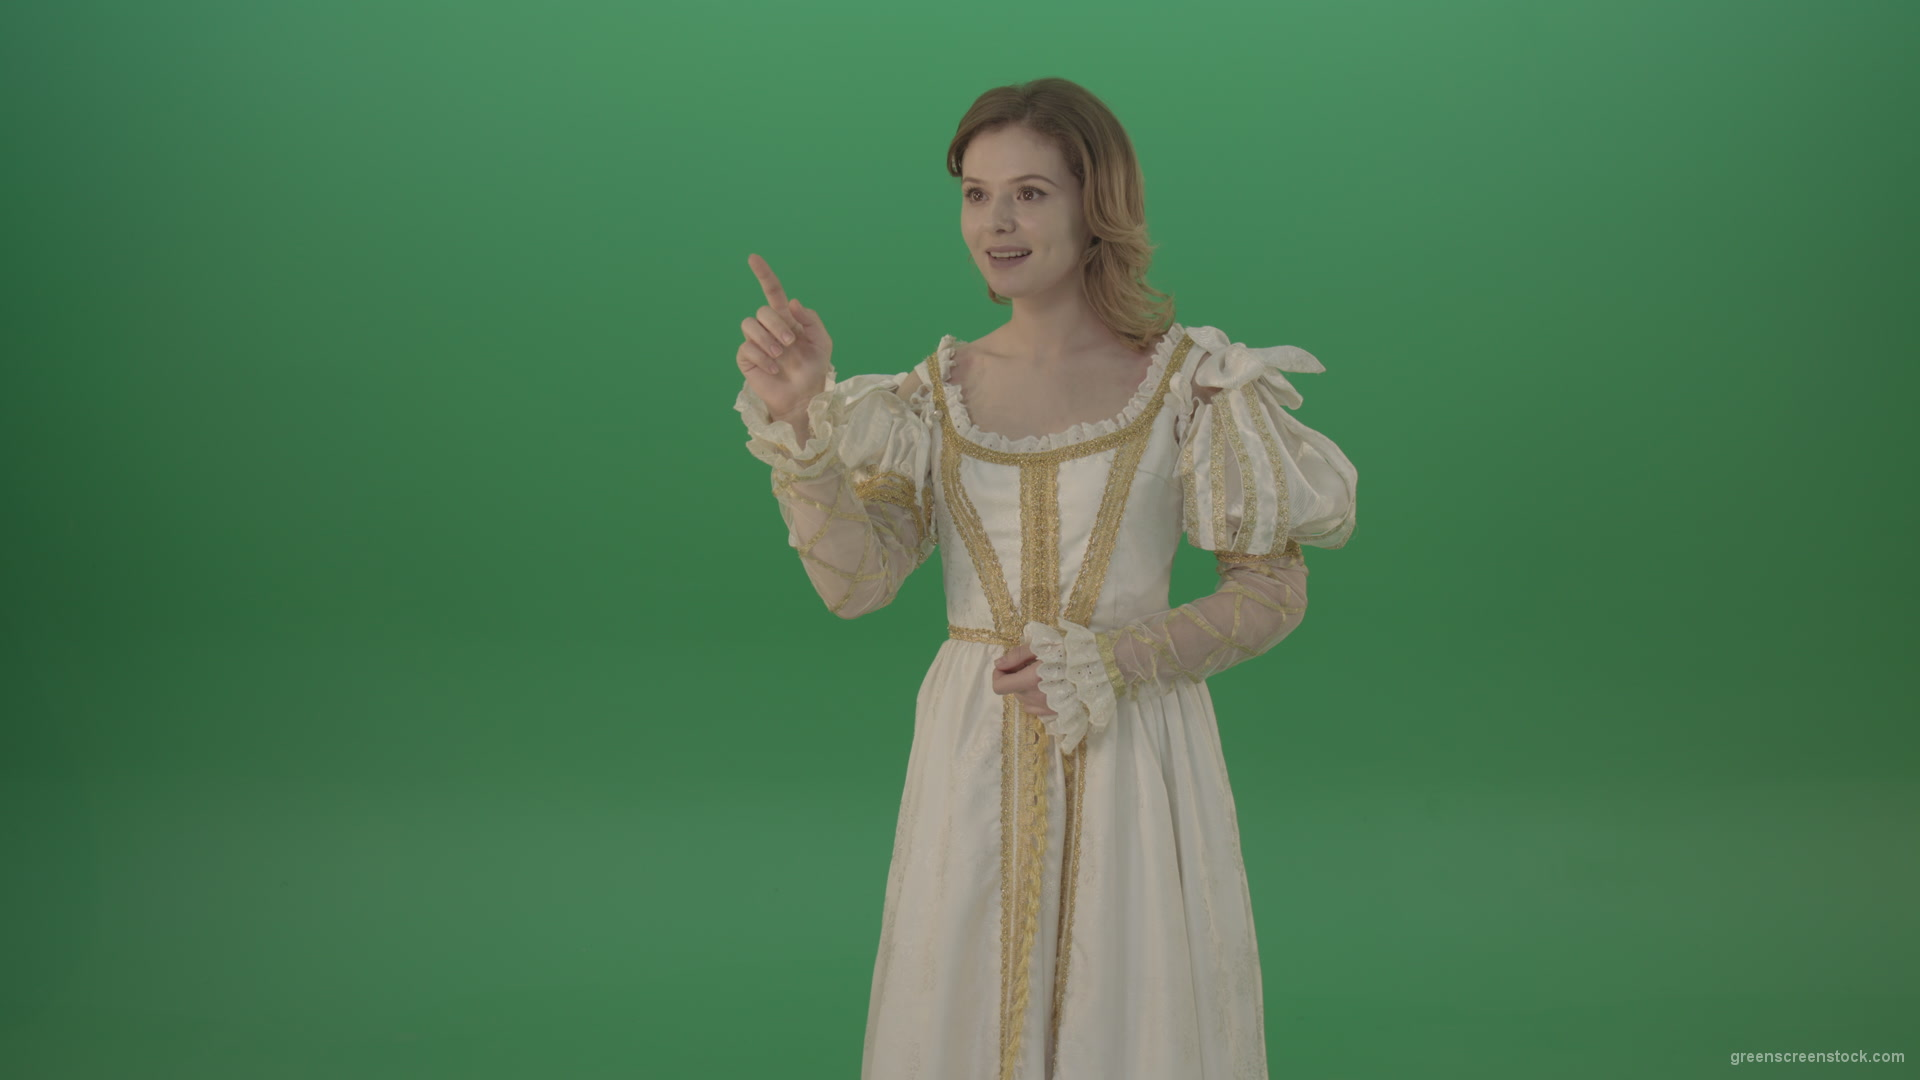 Girl-flips-a-virtual-screen-dressed-in-a-medieval-costume-isolated-on-green-screen_007 Green Screen Stock